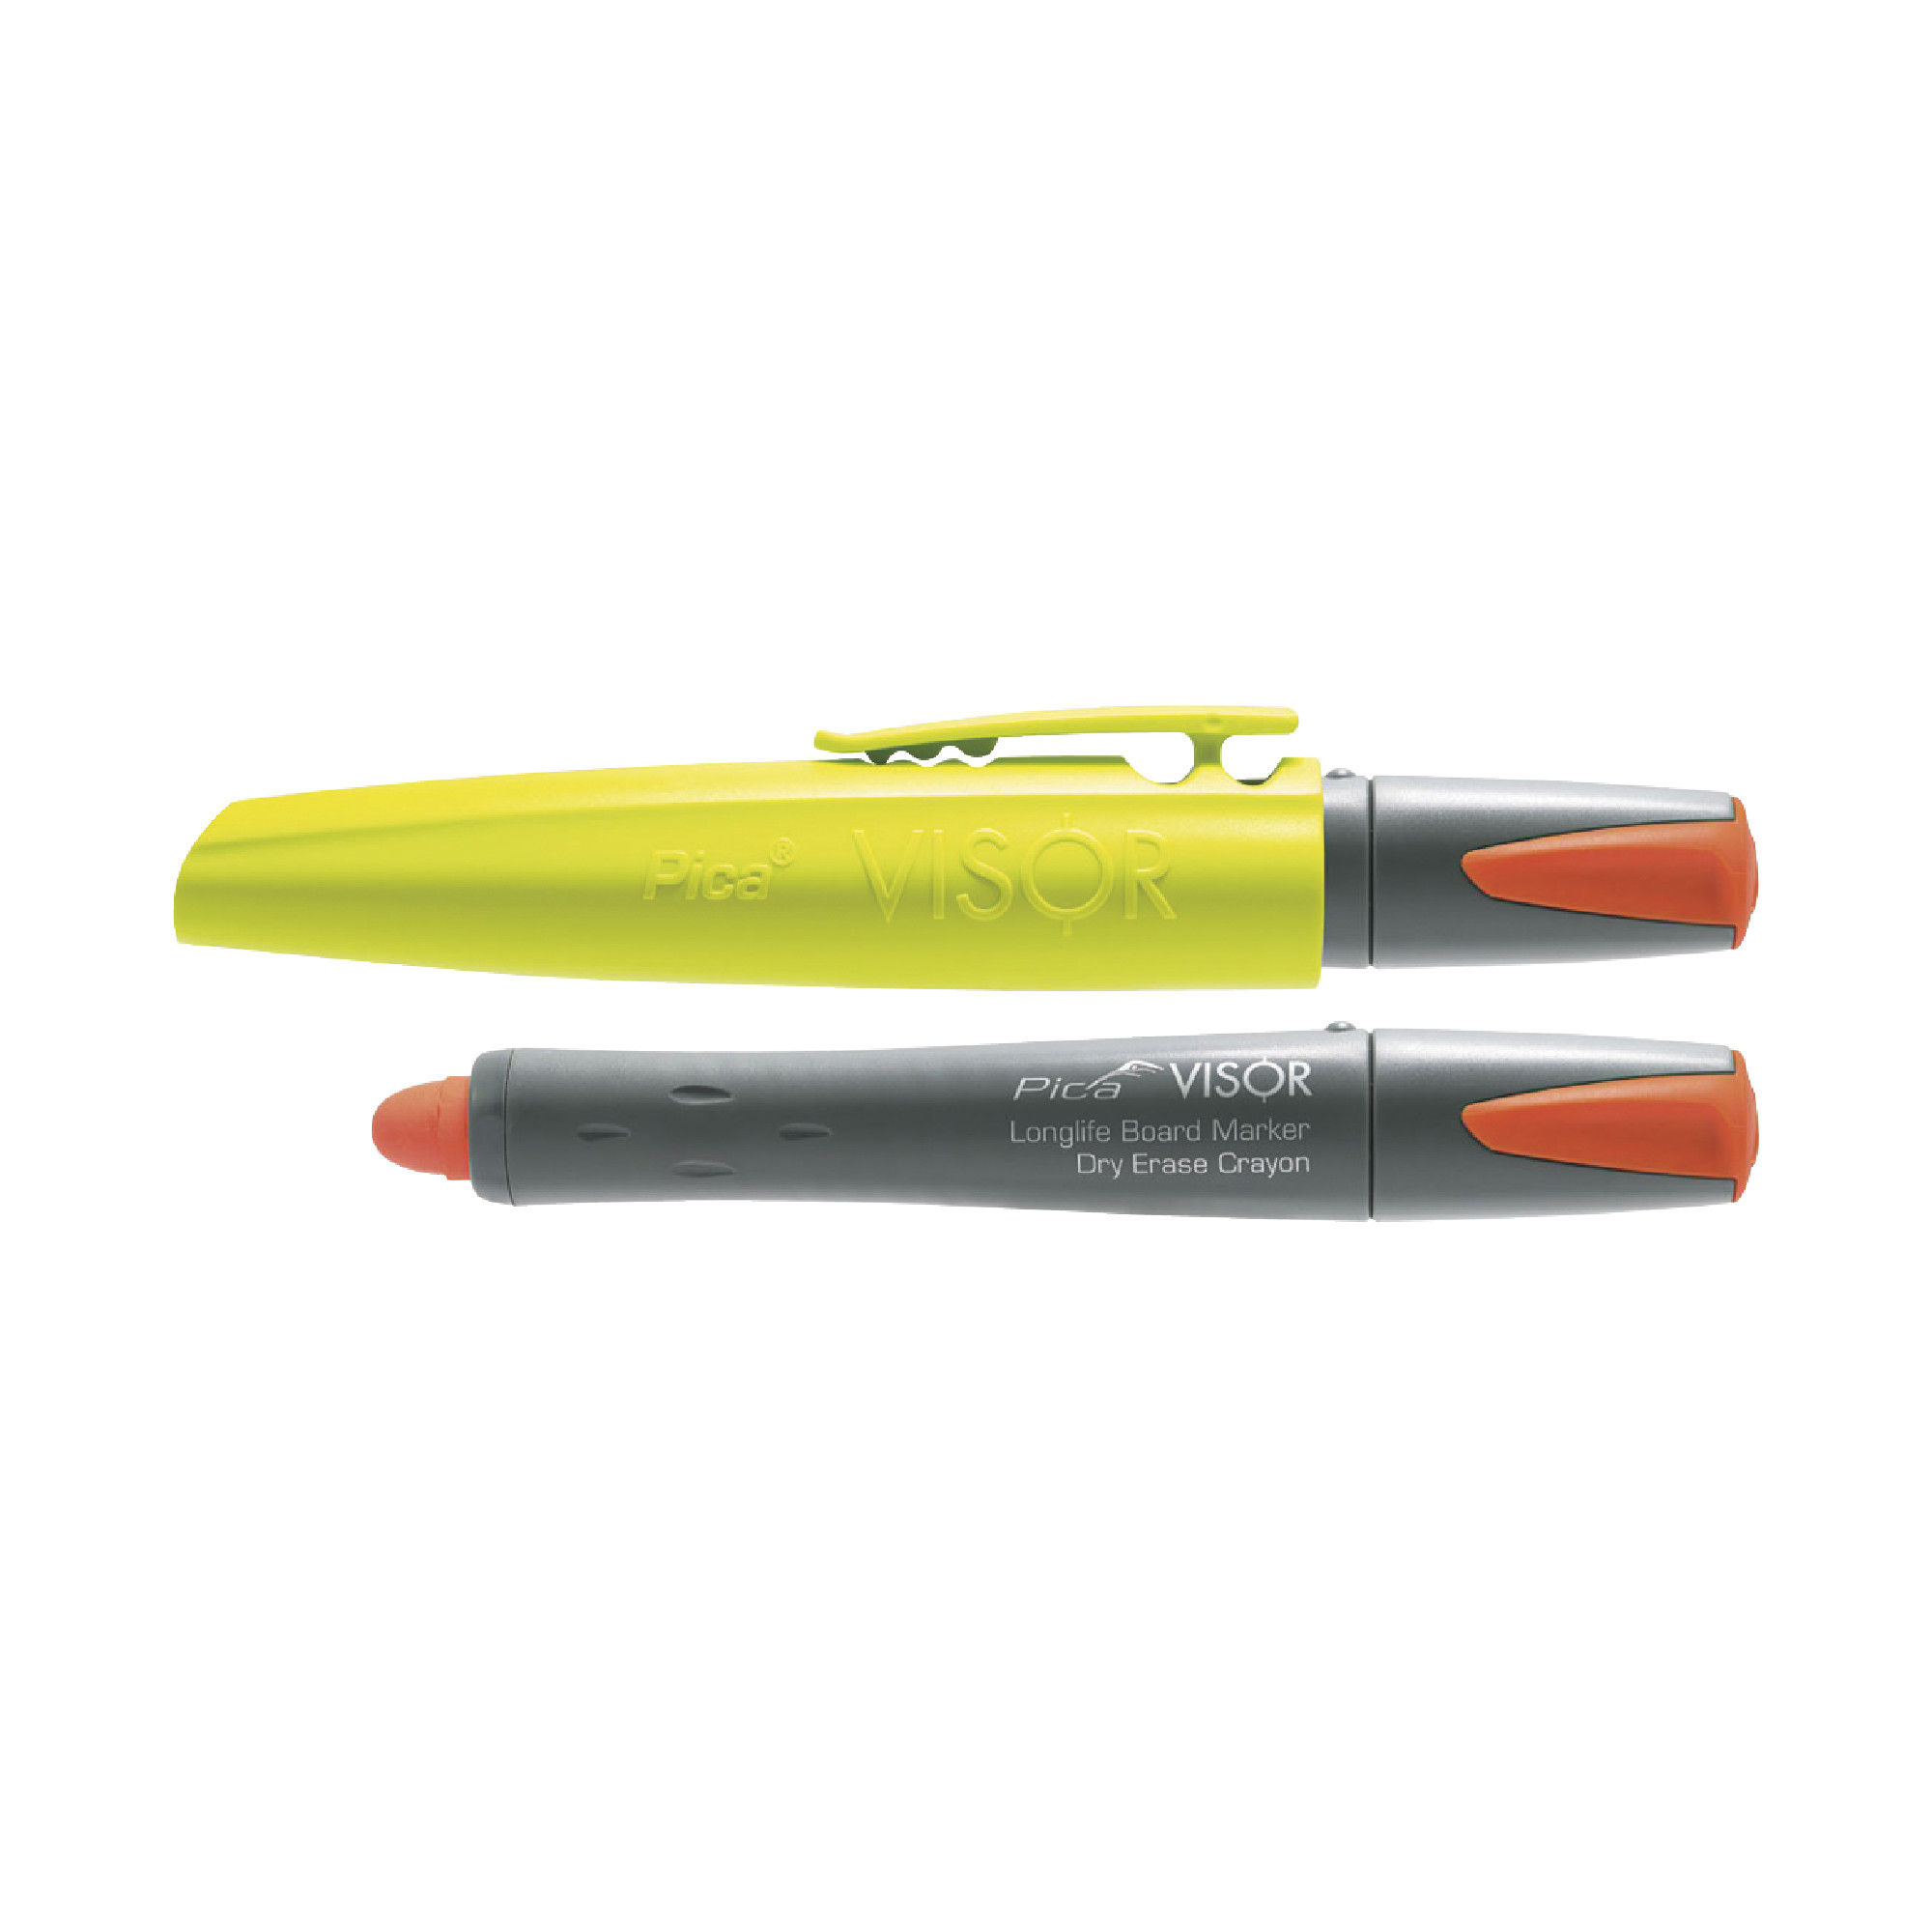 VISOR Longlife Board Marker, The Marker That Never Dries Out, Orange